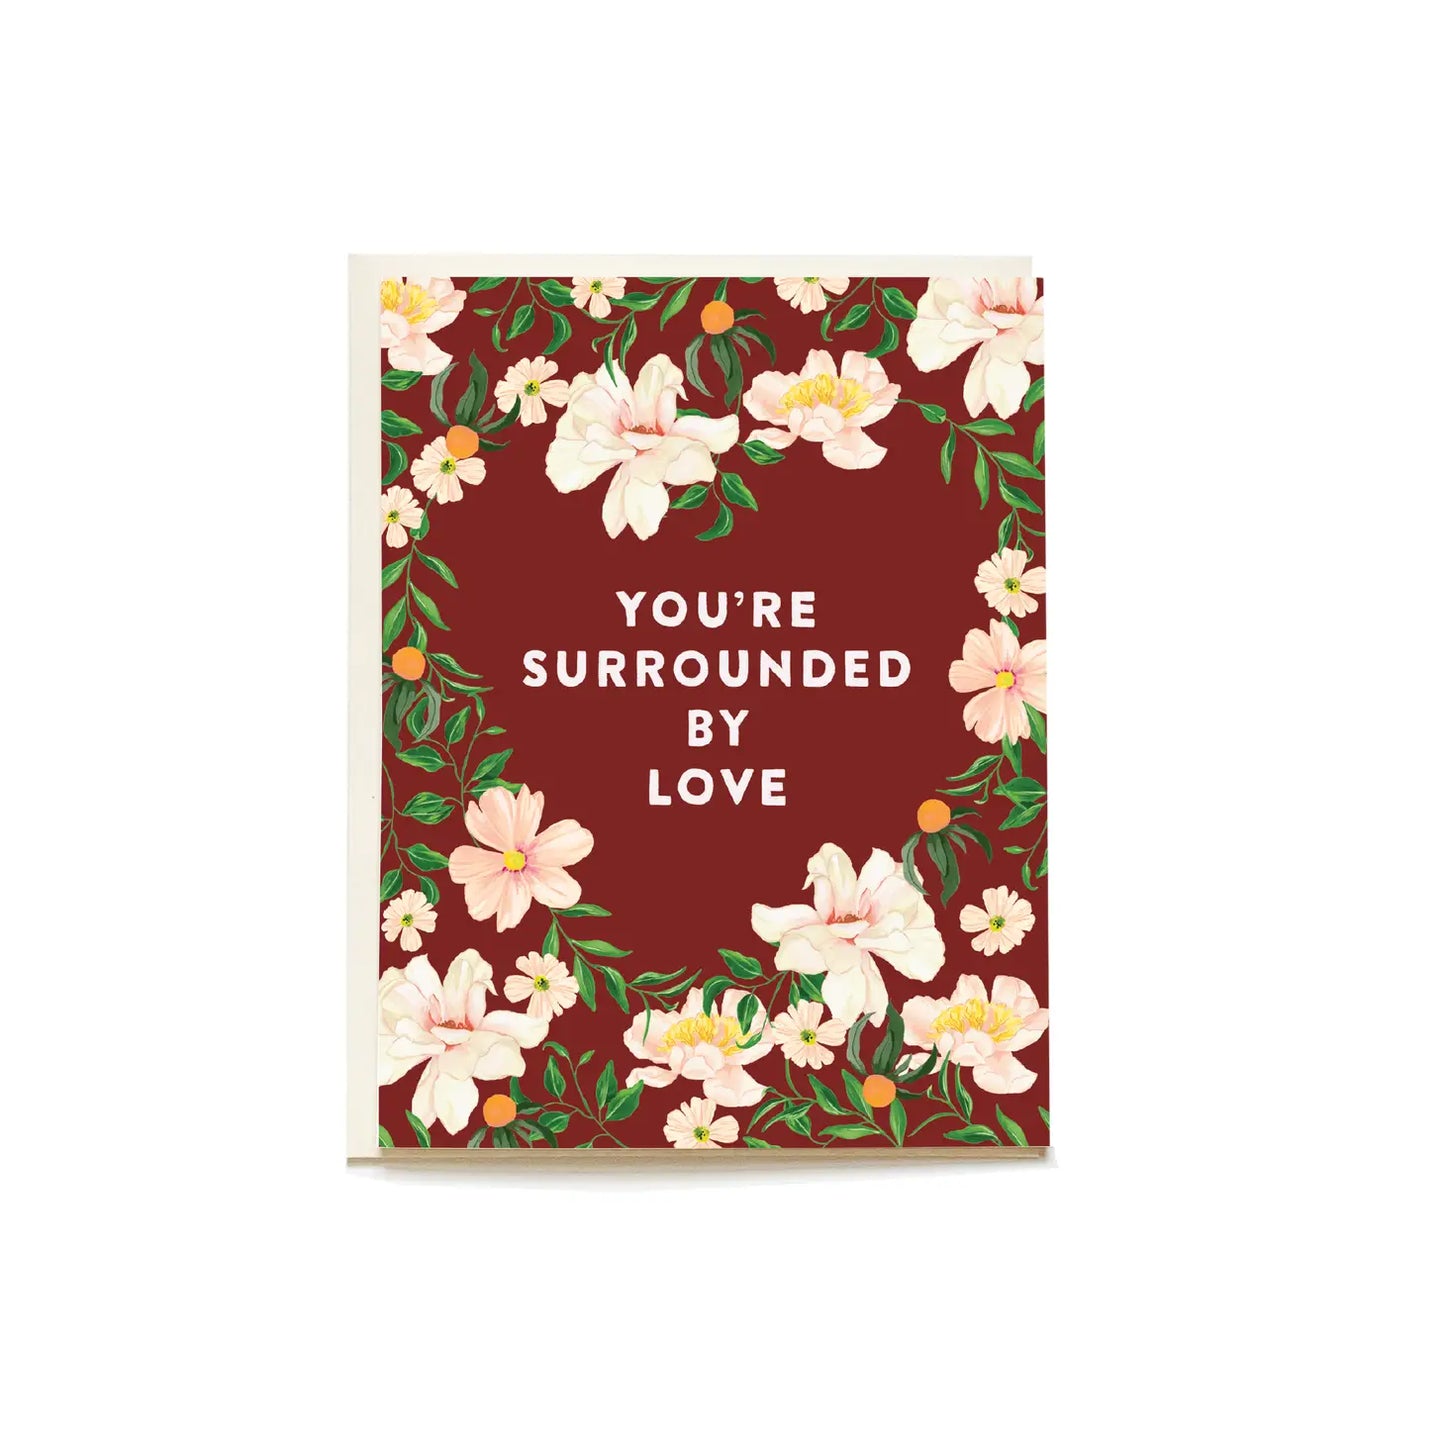 Surrounded by Love Sympathy Greeting Card